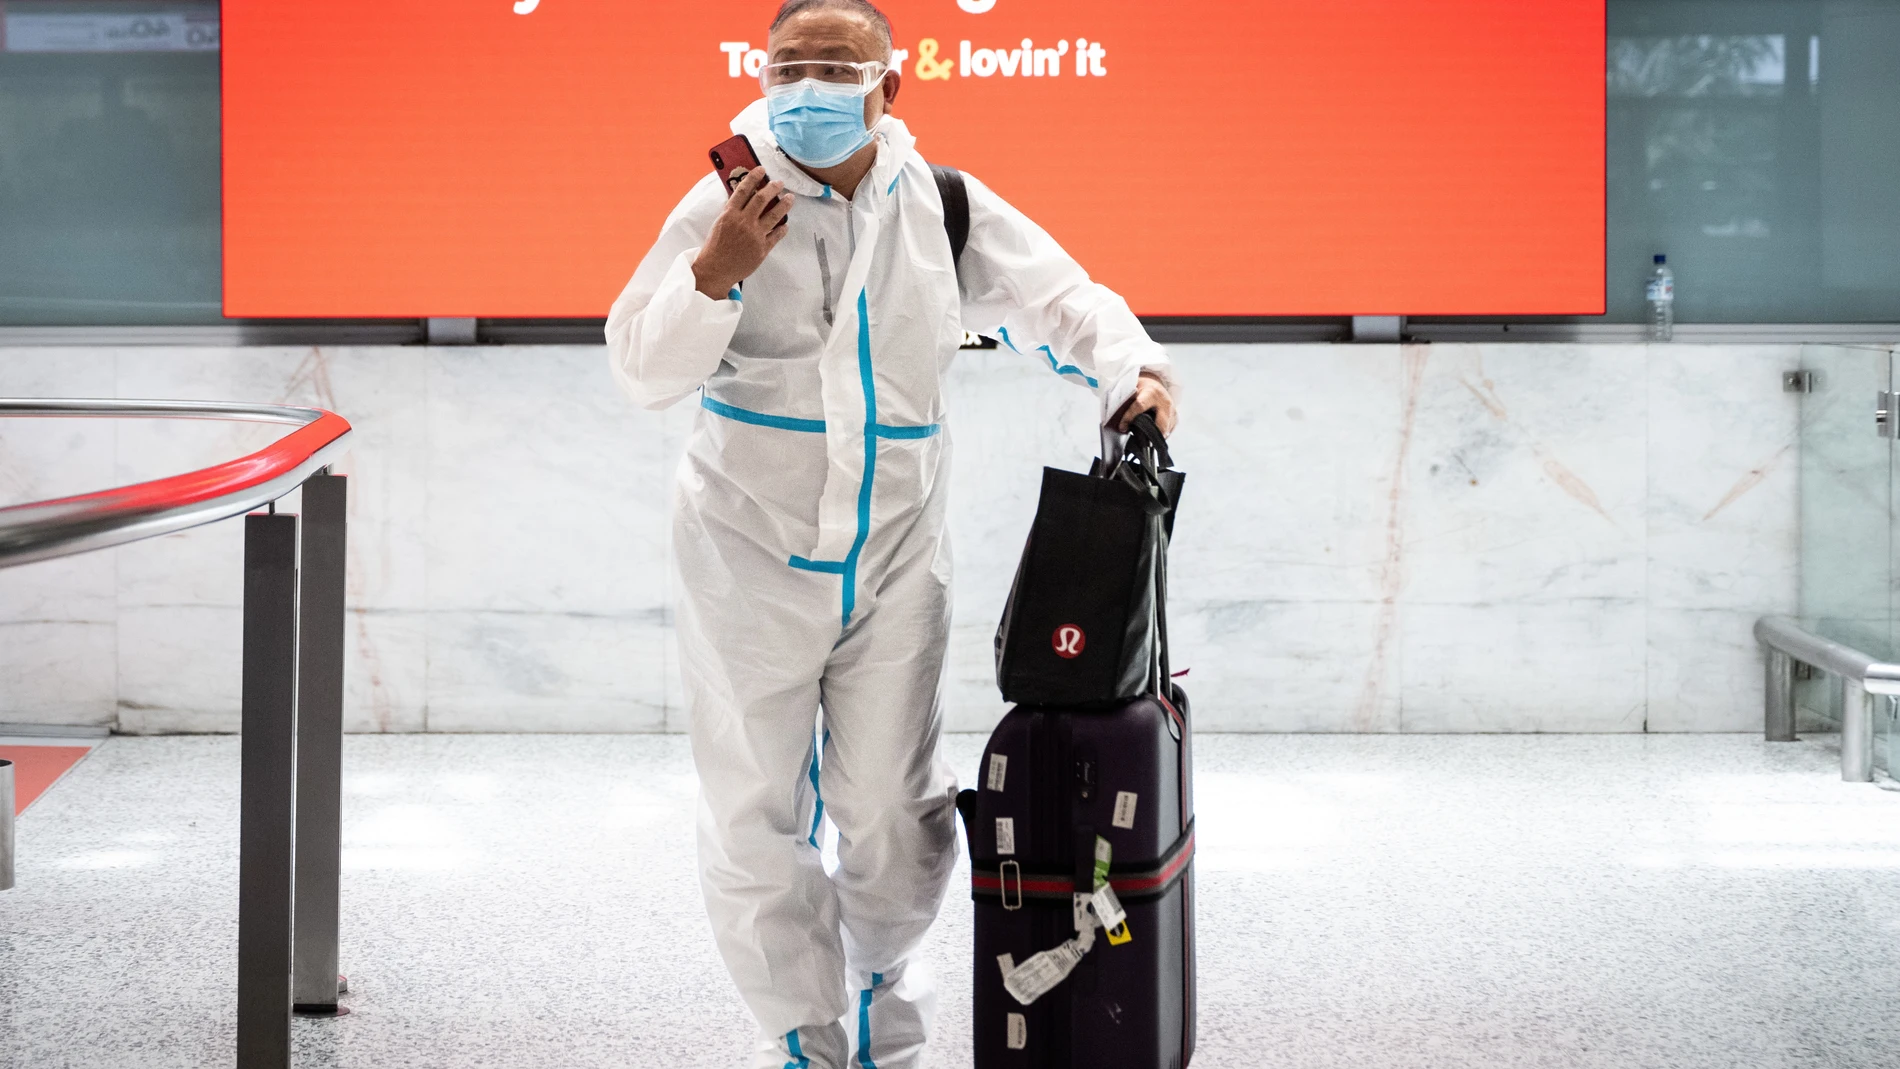 Sydney (Australia), 29/11/2021.- A traveler wearing personal protective equipment (PPE) arrives at Sydney International Airport in Sydney, New South Wales (NSW), Australia, 29 November 2021. The Omicron variant of SARS-CoV-2, the virus that causes COVID-19, has arrived in Australia after testing confirmed two overseas travellers who arrived in Sydney were infected with the new strain. EFE/EPA/JAMES GOURLEY AUSTRALIA AND NEW ZEALAND OUT